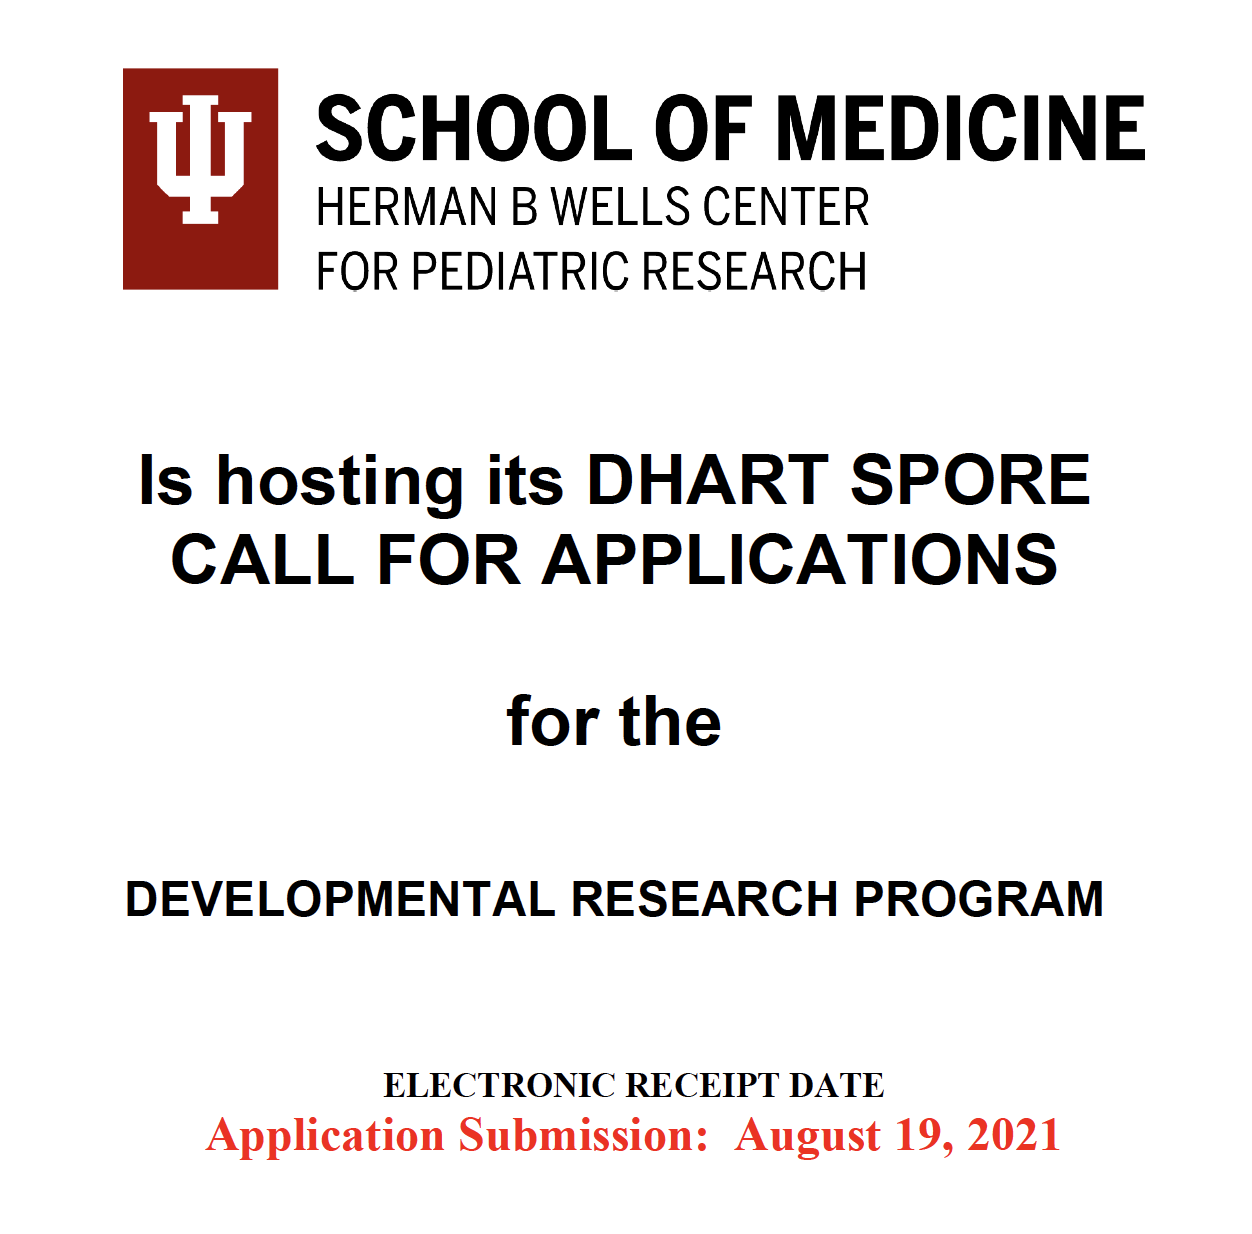 DHART SPORE DRP 2021 Call for Applications